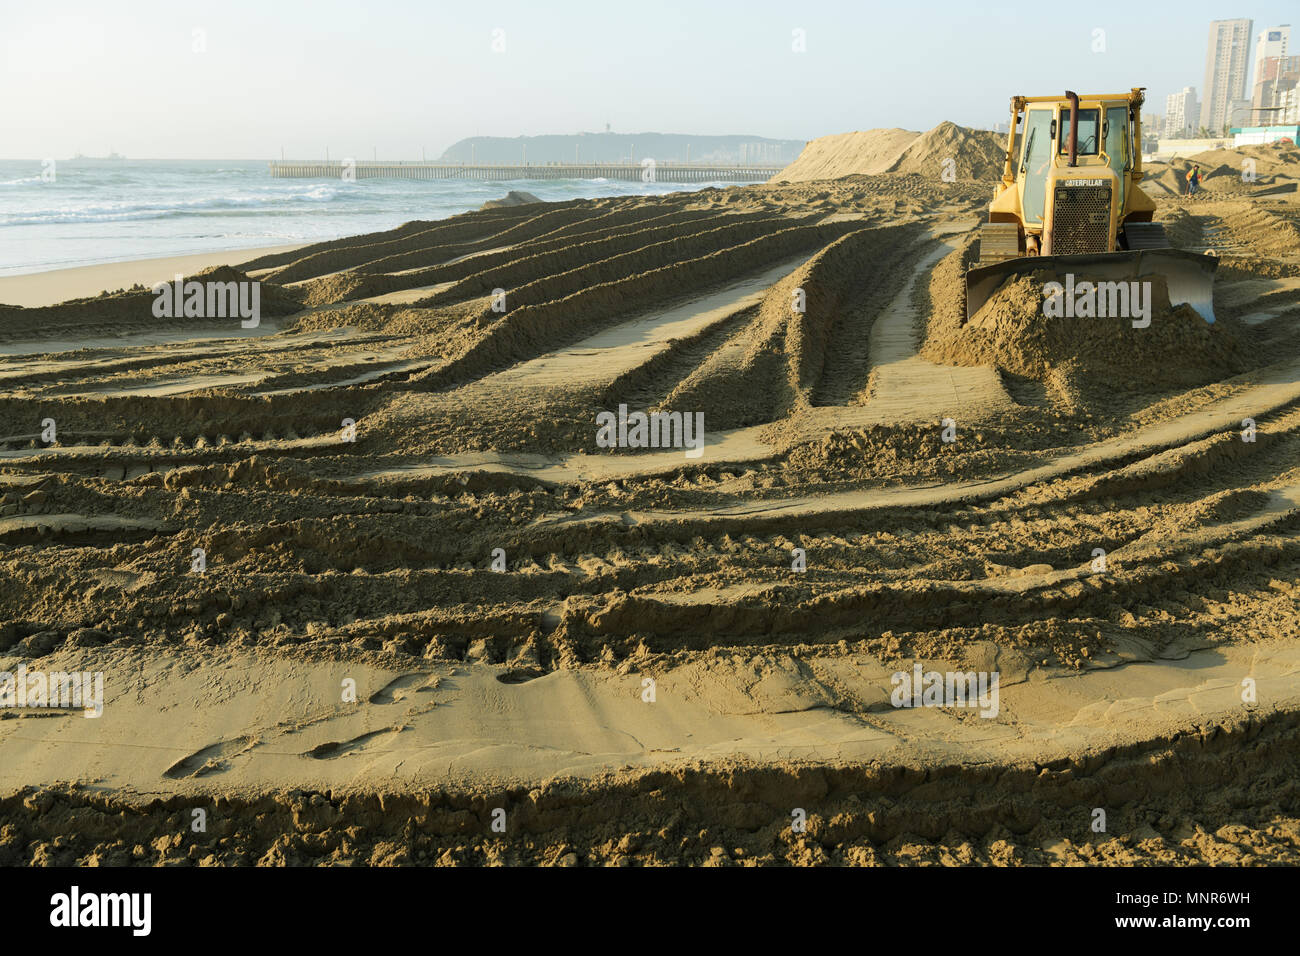 Durban, KwaZulu-Natal, South Africa, yellow bulldozer levelling sand, beach repair project on Golden Mile beachfront, landscape, earth moving Stock Photo